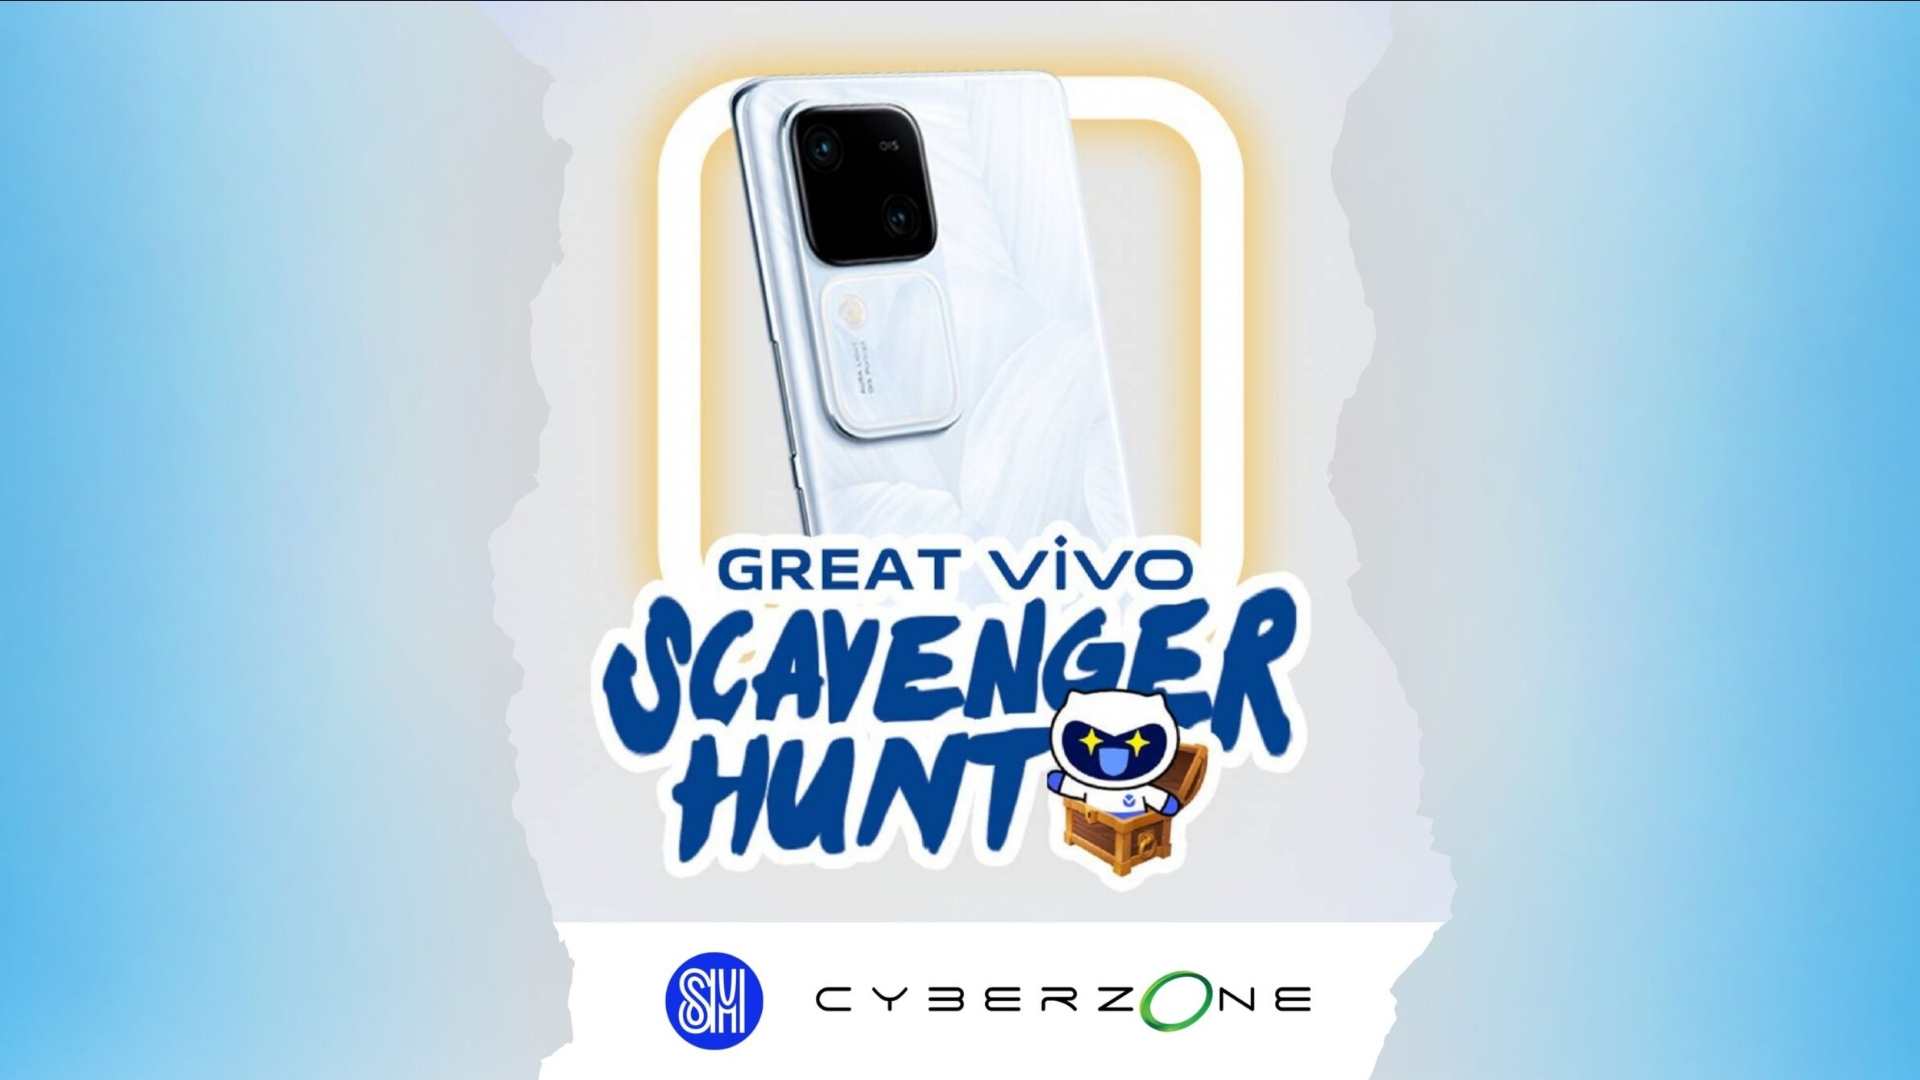 The "Great Vivo Scavenger Hunt" at SM malls offers the chance to win a V30 smartphone.